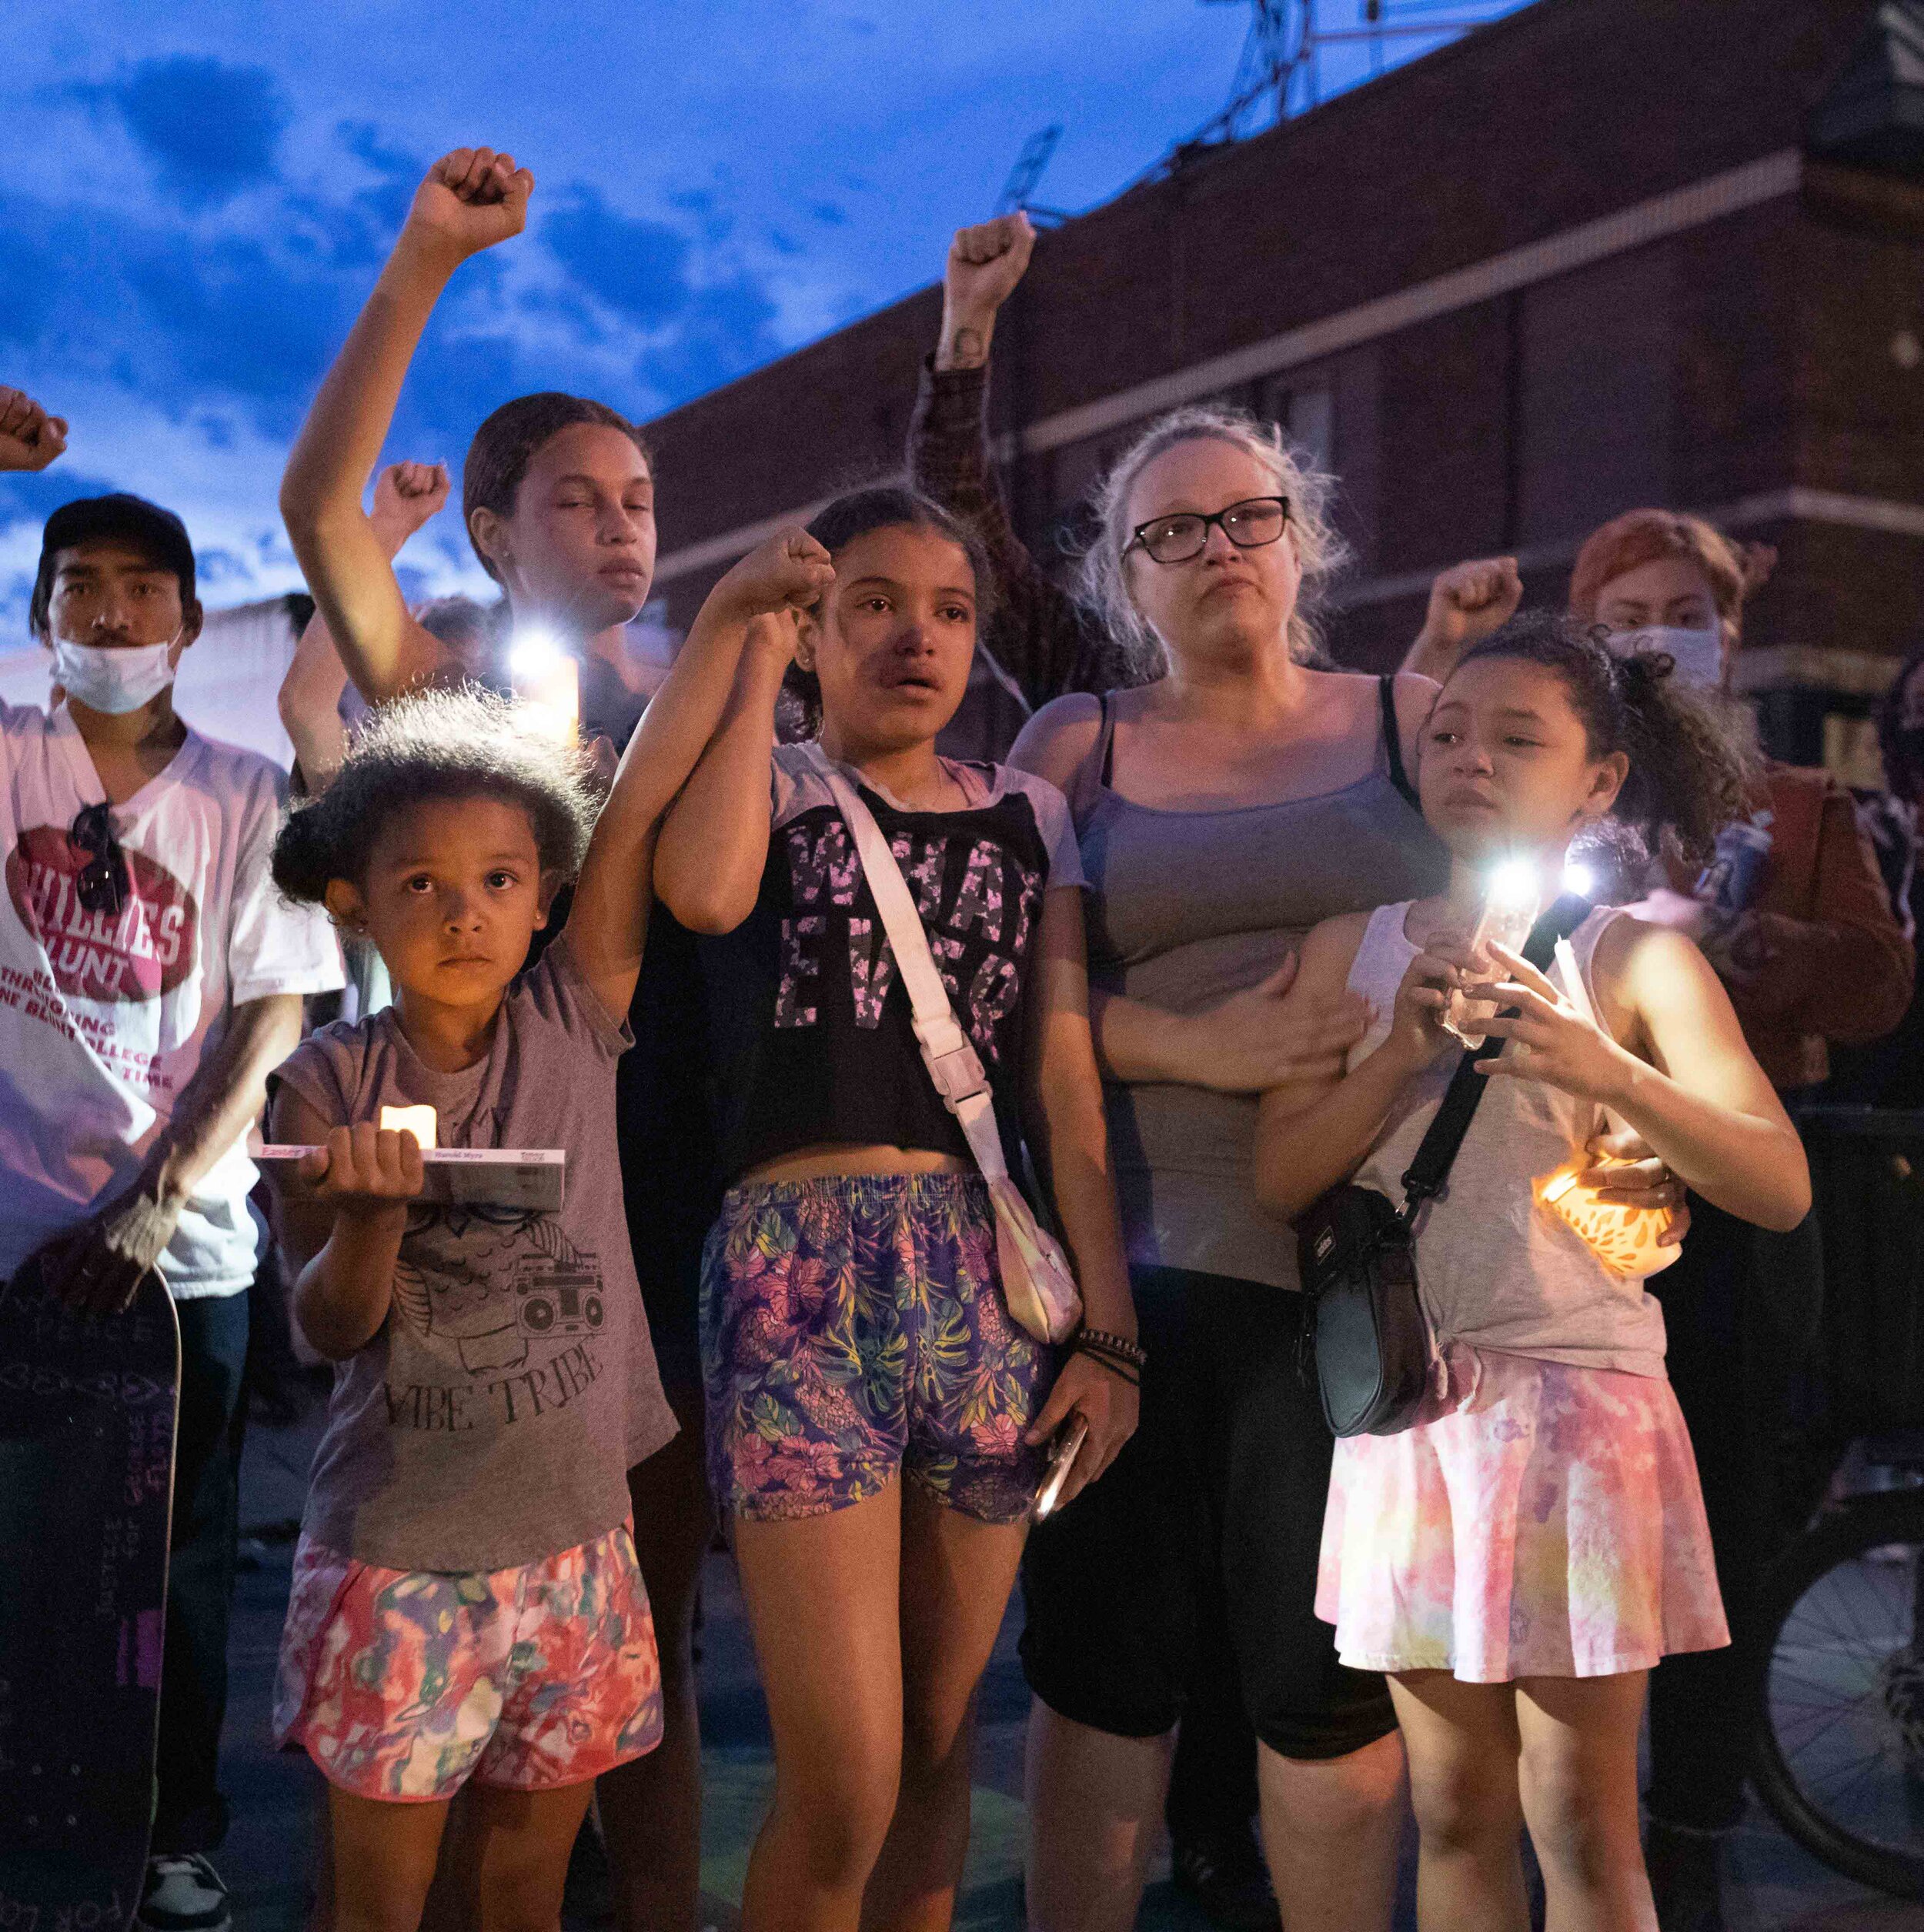  A group of children raise their fists in the air while mourning the loss of George Floyd at the site of his memorial in Minneapolis, Minnesota on Jun 14, 2020. 